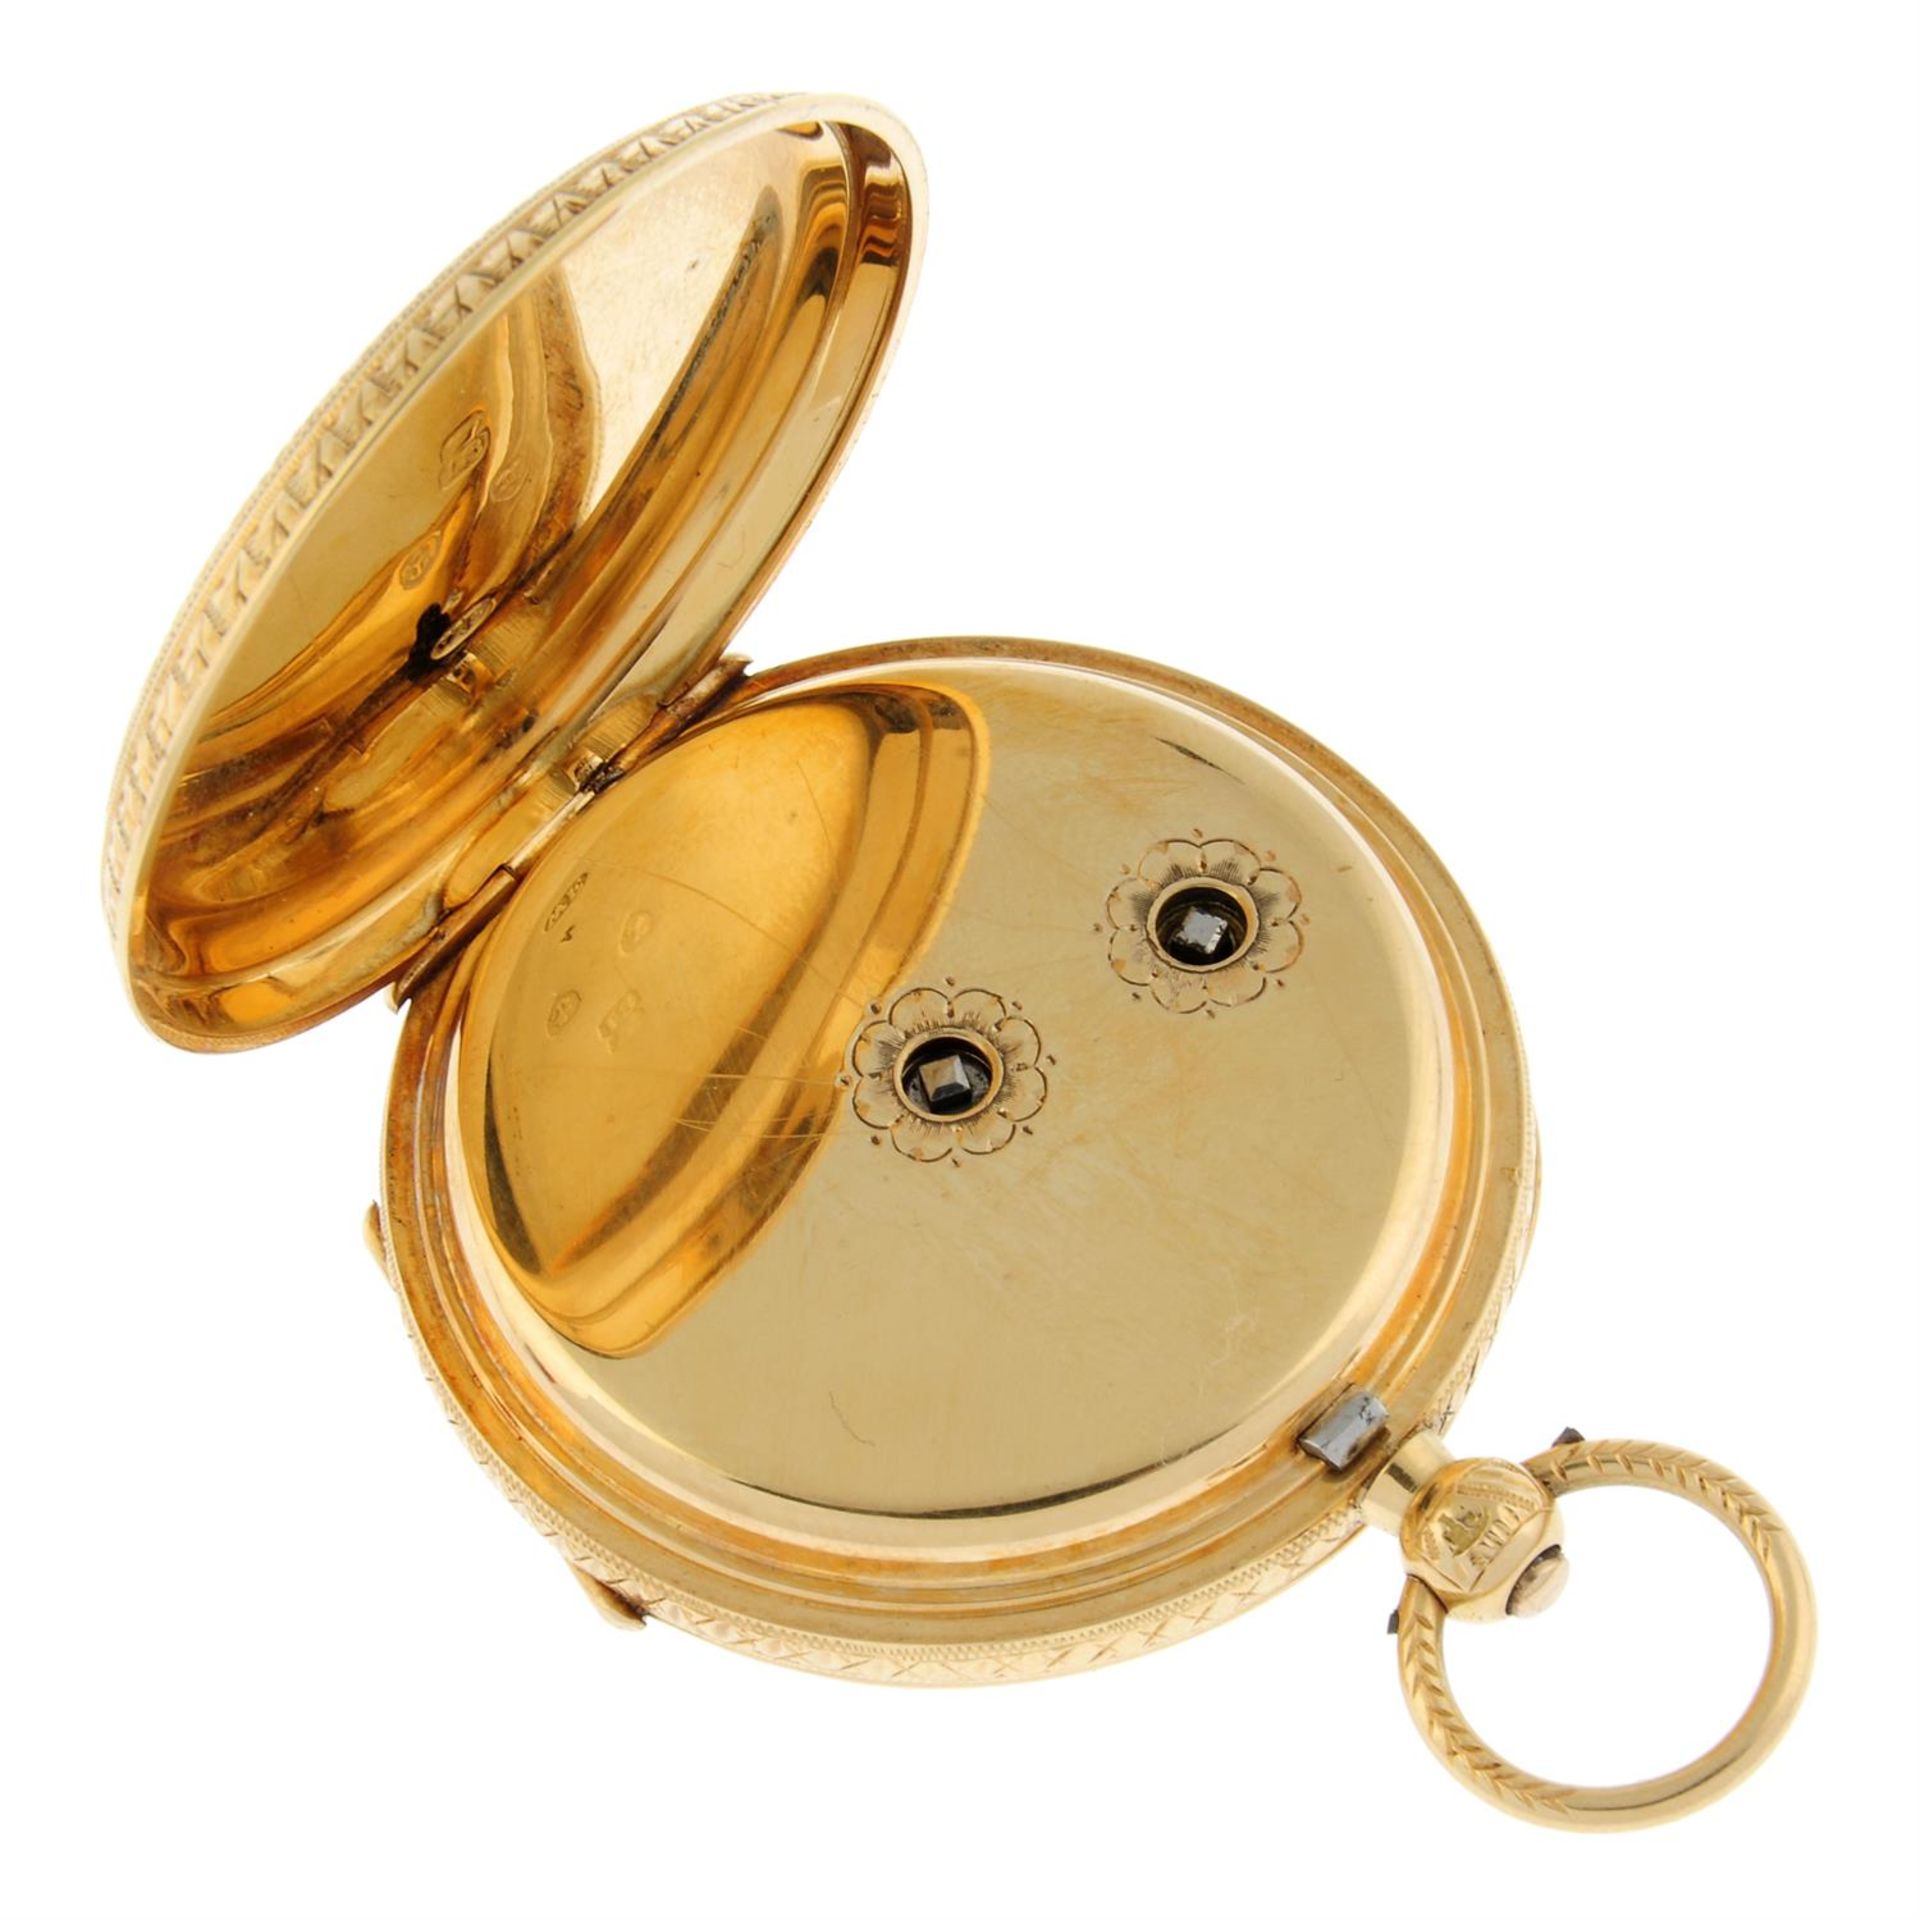 A pocket watch by C. Moody, 37mm. - Image 3 of 3